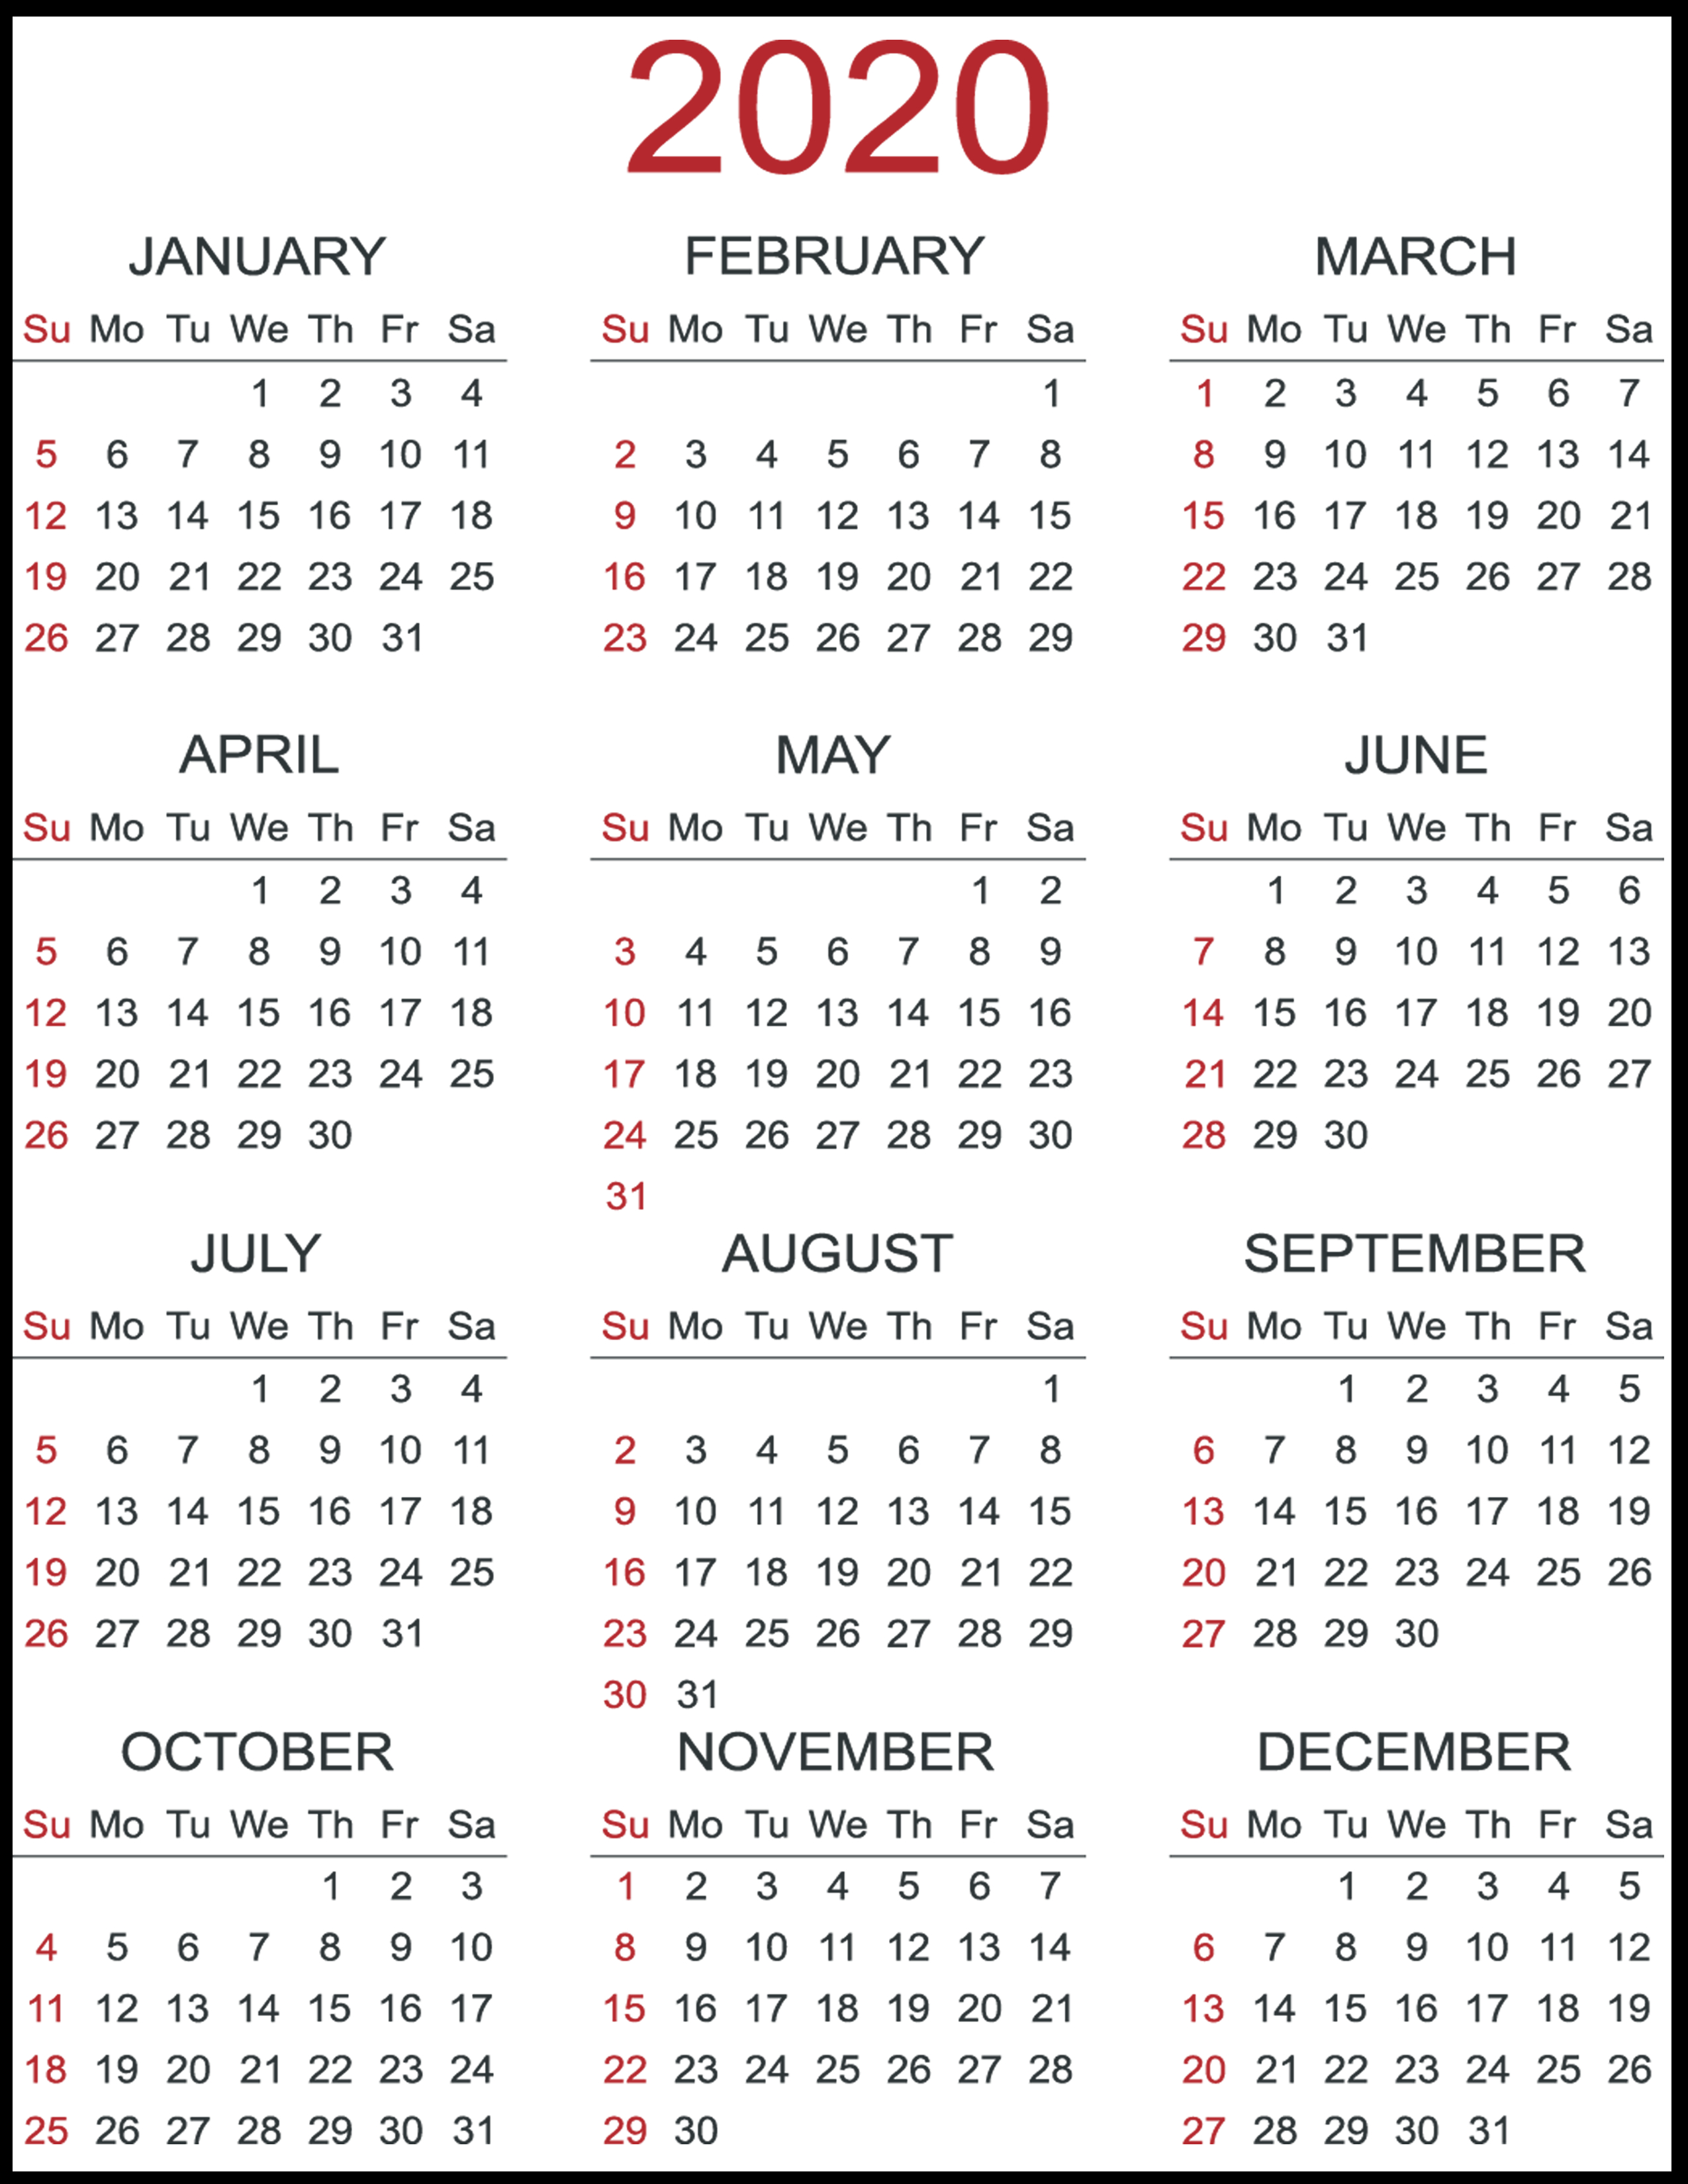 Free Calendars To Print For 2020  Bolan.horizonconsulting.co with 2020 Calendar Hk Excel